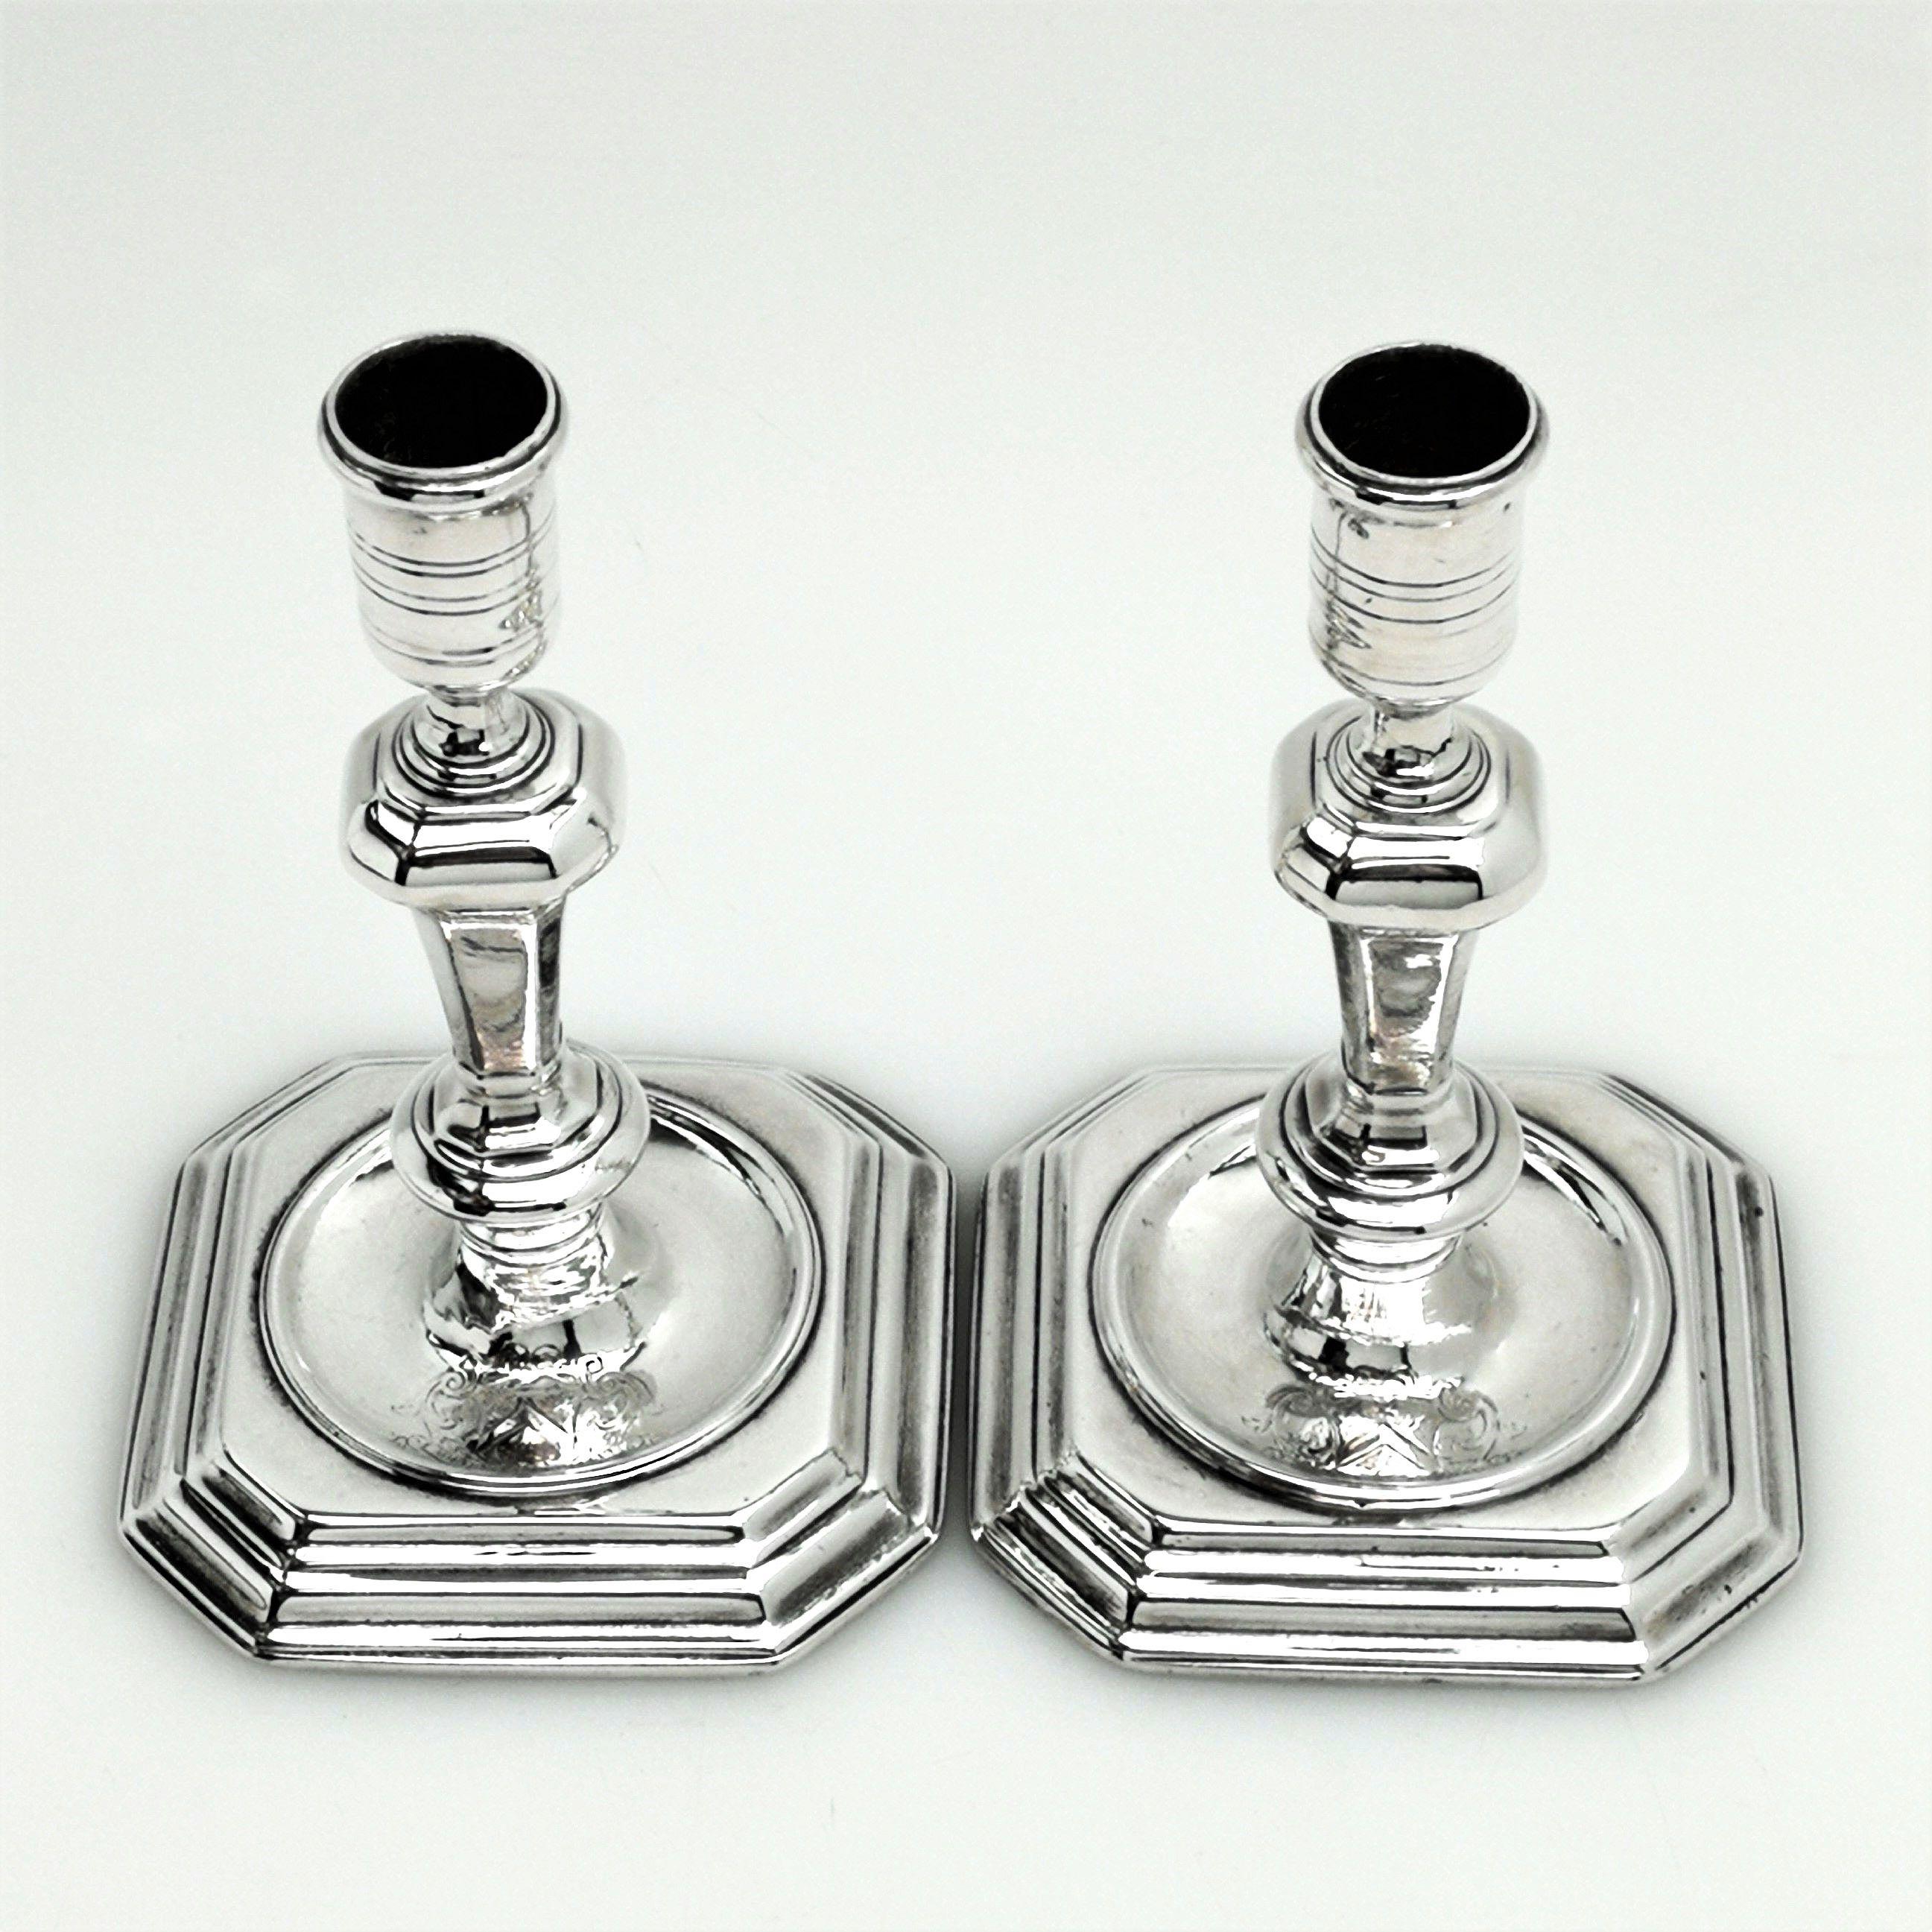 A magnificent pair of Britannia standard solid Silver George I silver candlesticks. These Georgian cast silver candlesticks have square bases with cut corners, mirrored in the octagonal knopped column. The candlesticks have sunken well bases and